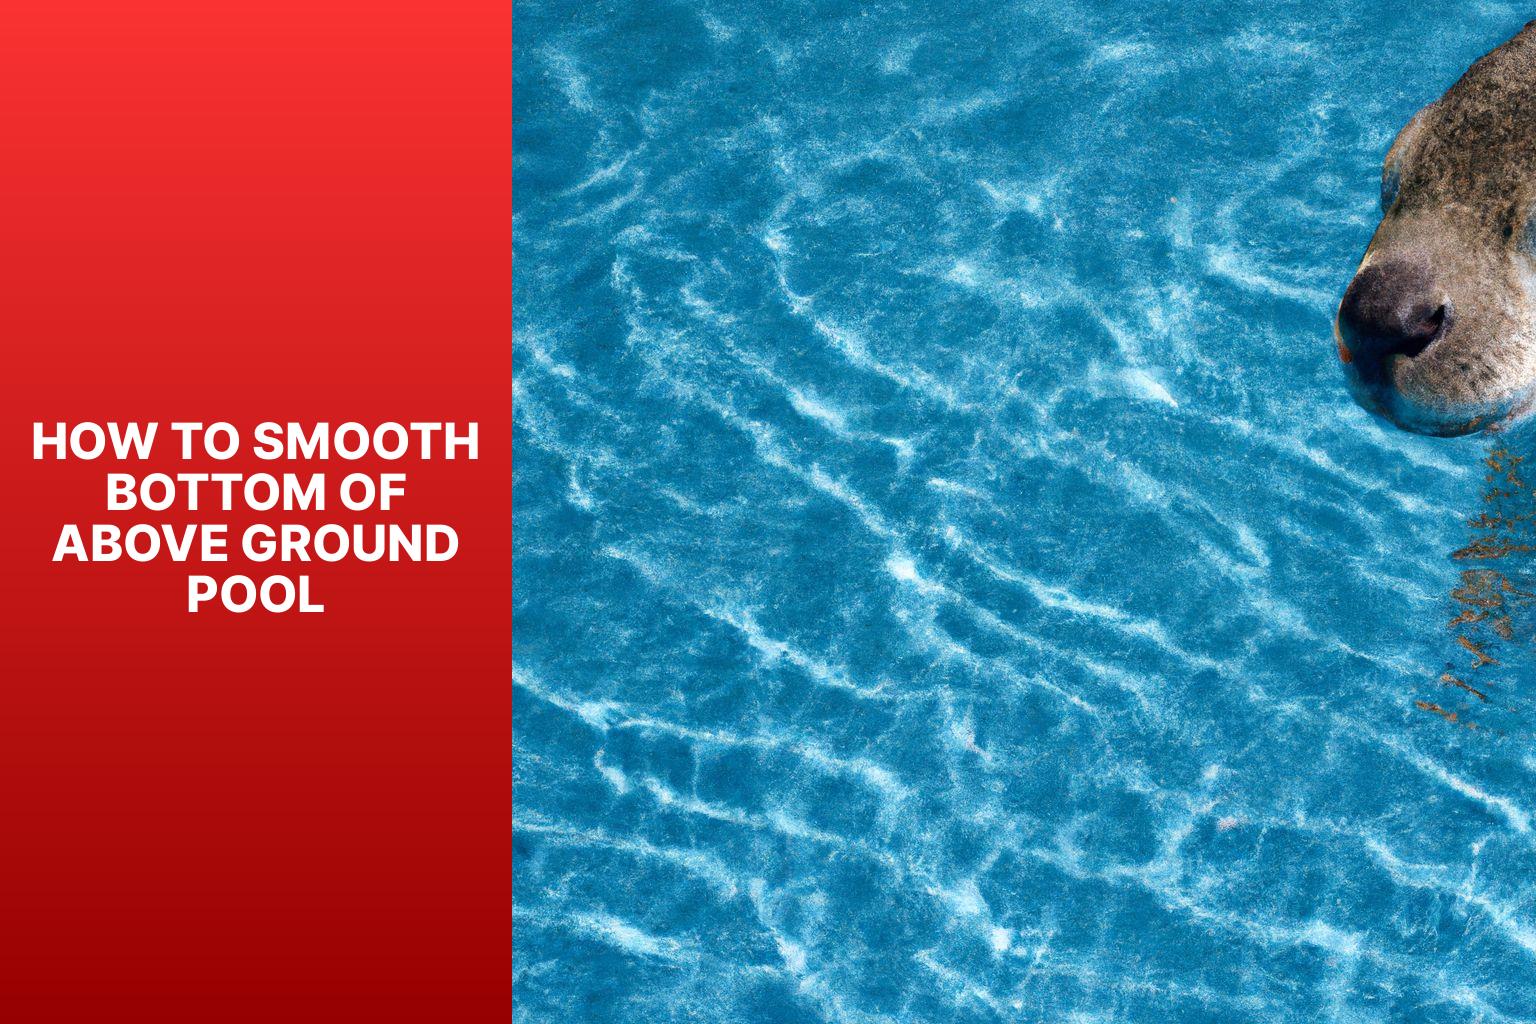 how to smooth bottom of above ground poolz3gp How to Smooth Bottom of Above Ground Pool?